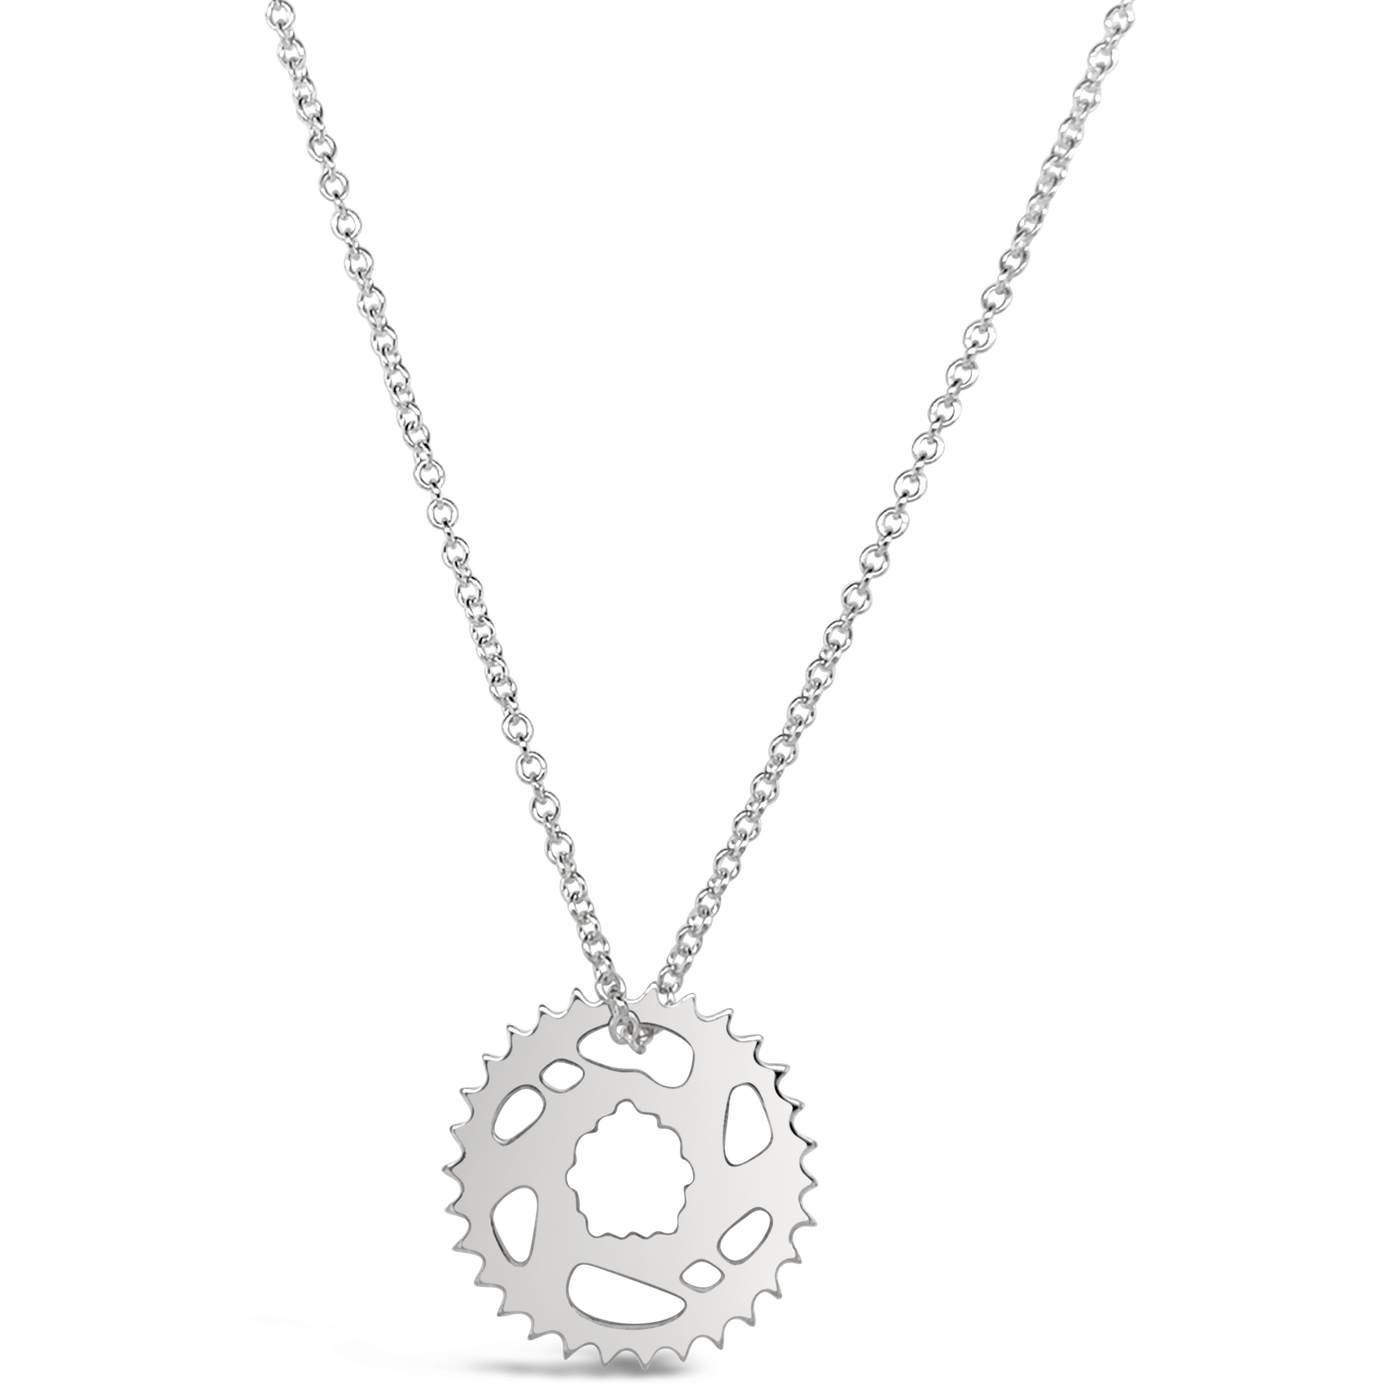 Bike Chain Ring Necklace